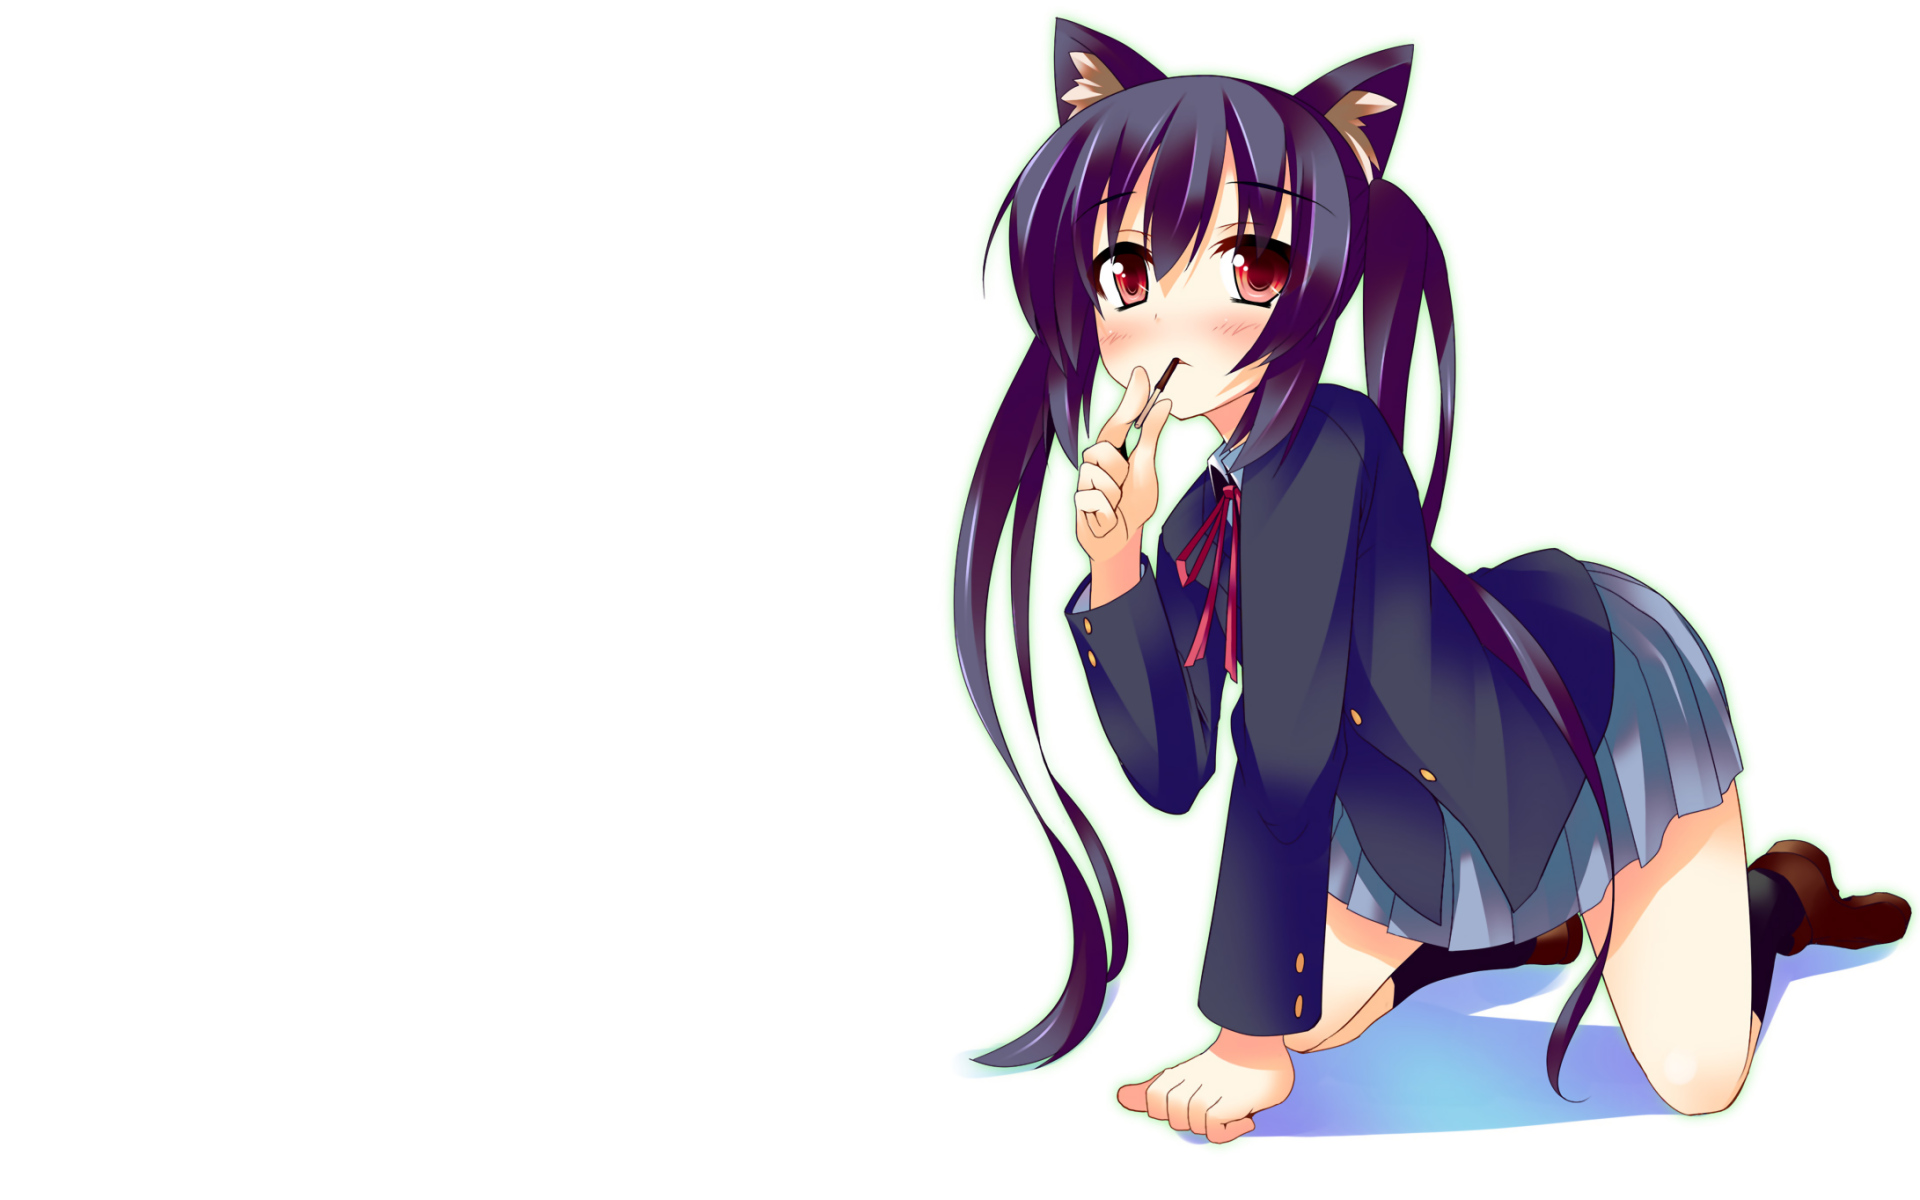 Anime character Azusa Nakano from K-ON! depicted in a cute desktop wallpaper.